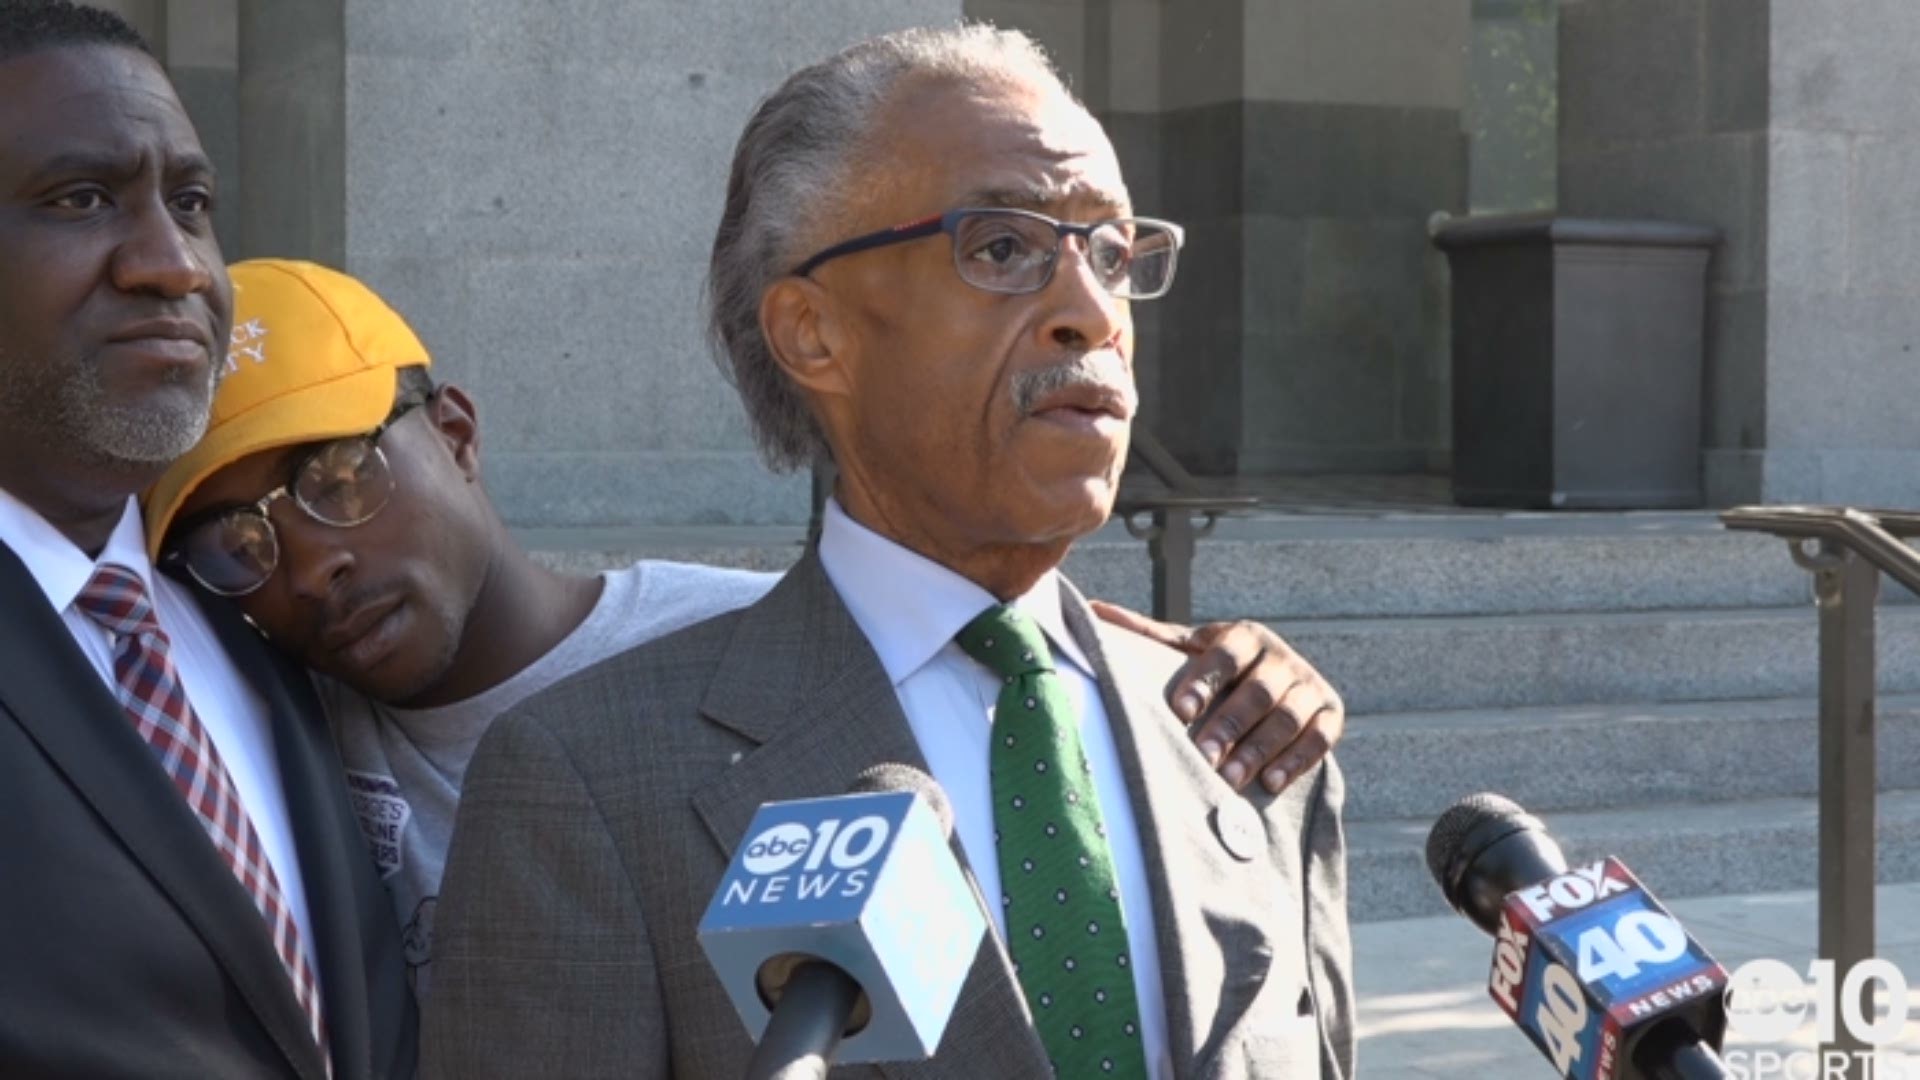 After meeting with the California Legislative Black Caucus, civil rights activist Rev. Al Sharpton slams the NFL for their ruling on Tuesday to require team personnel to stand for the National Anthem.